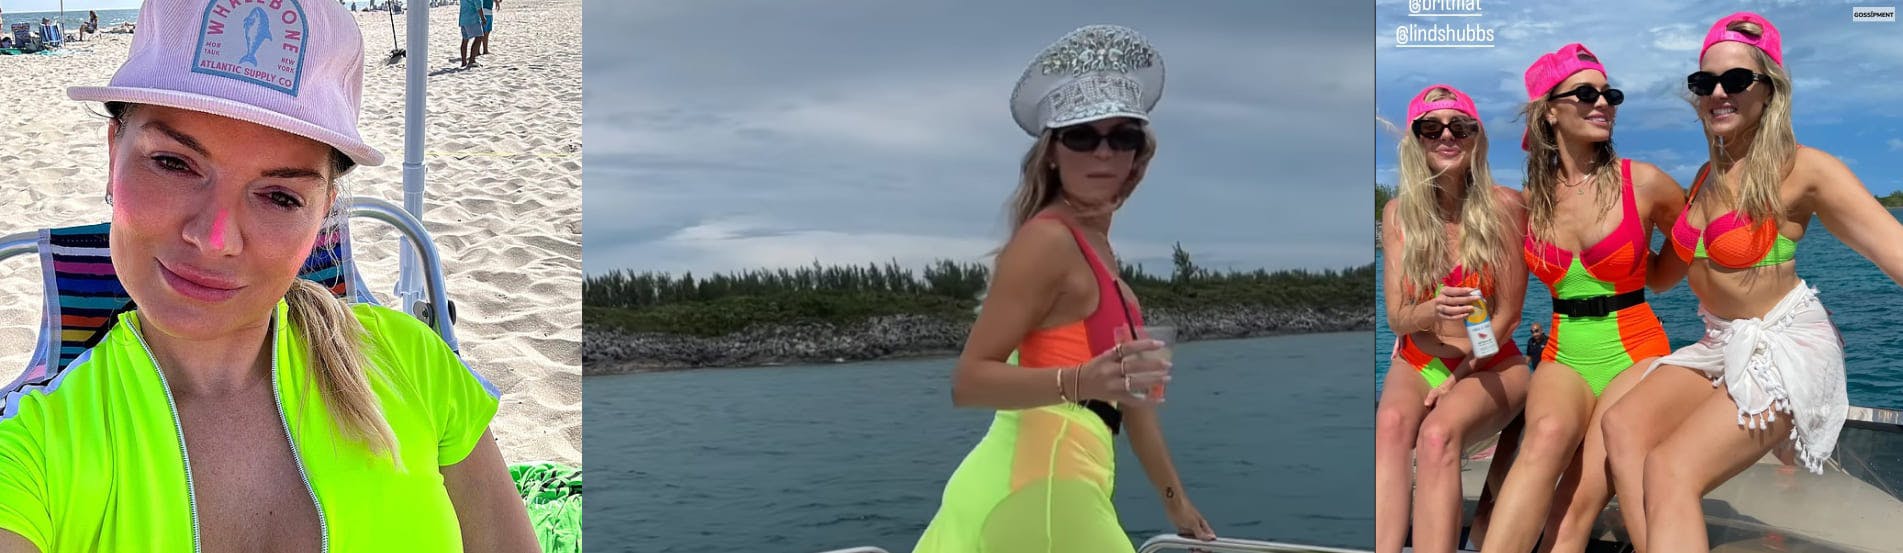 Cover Image for Lindsay Hubbard, Twerking On A Yacht, Enjoying Her Bachelorette Trip With Her Girlfriends